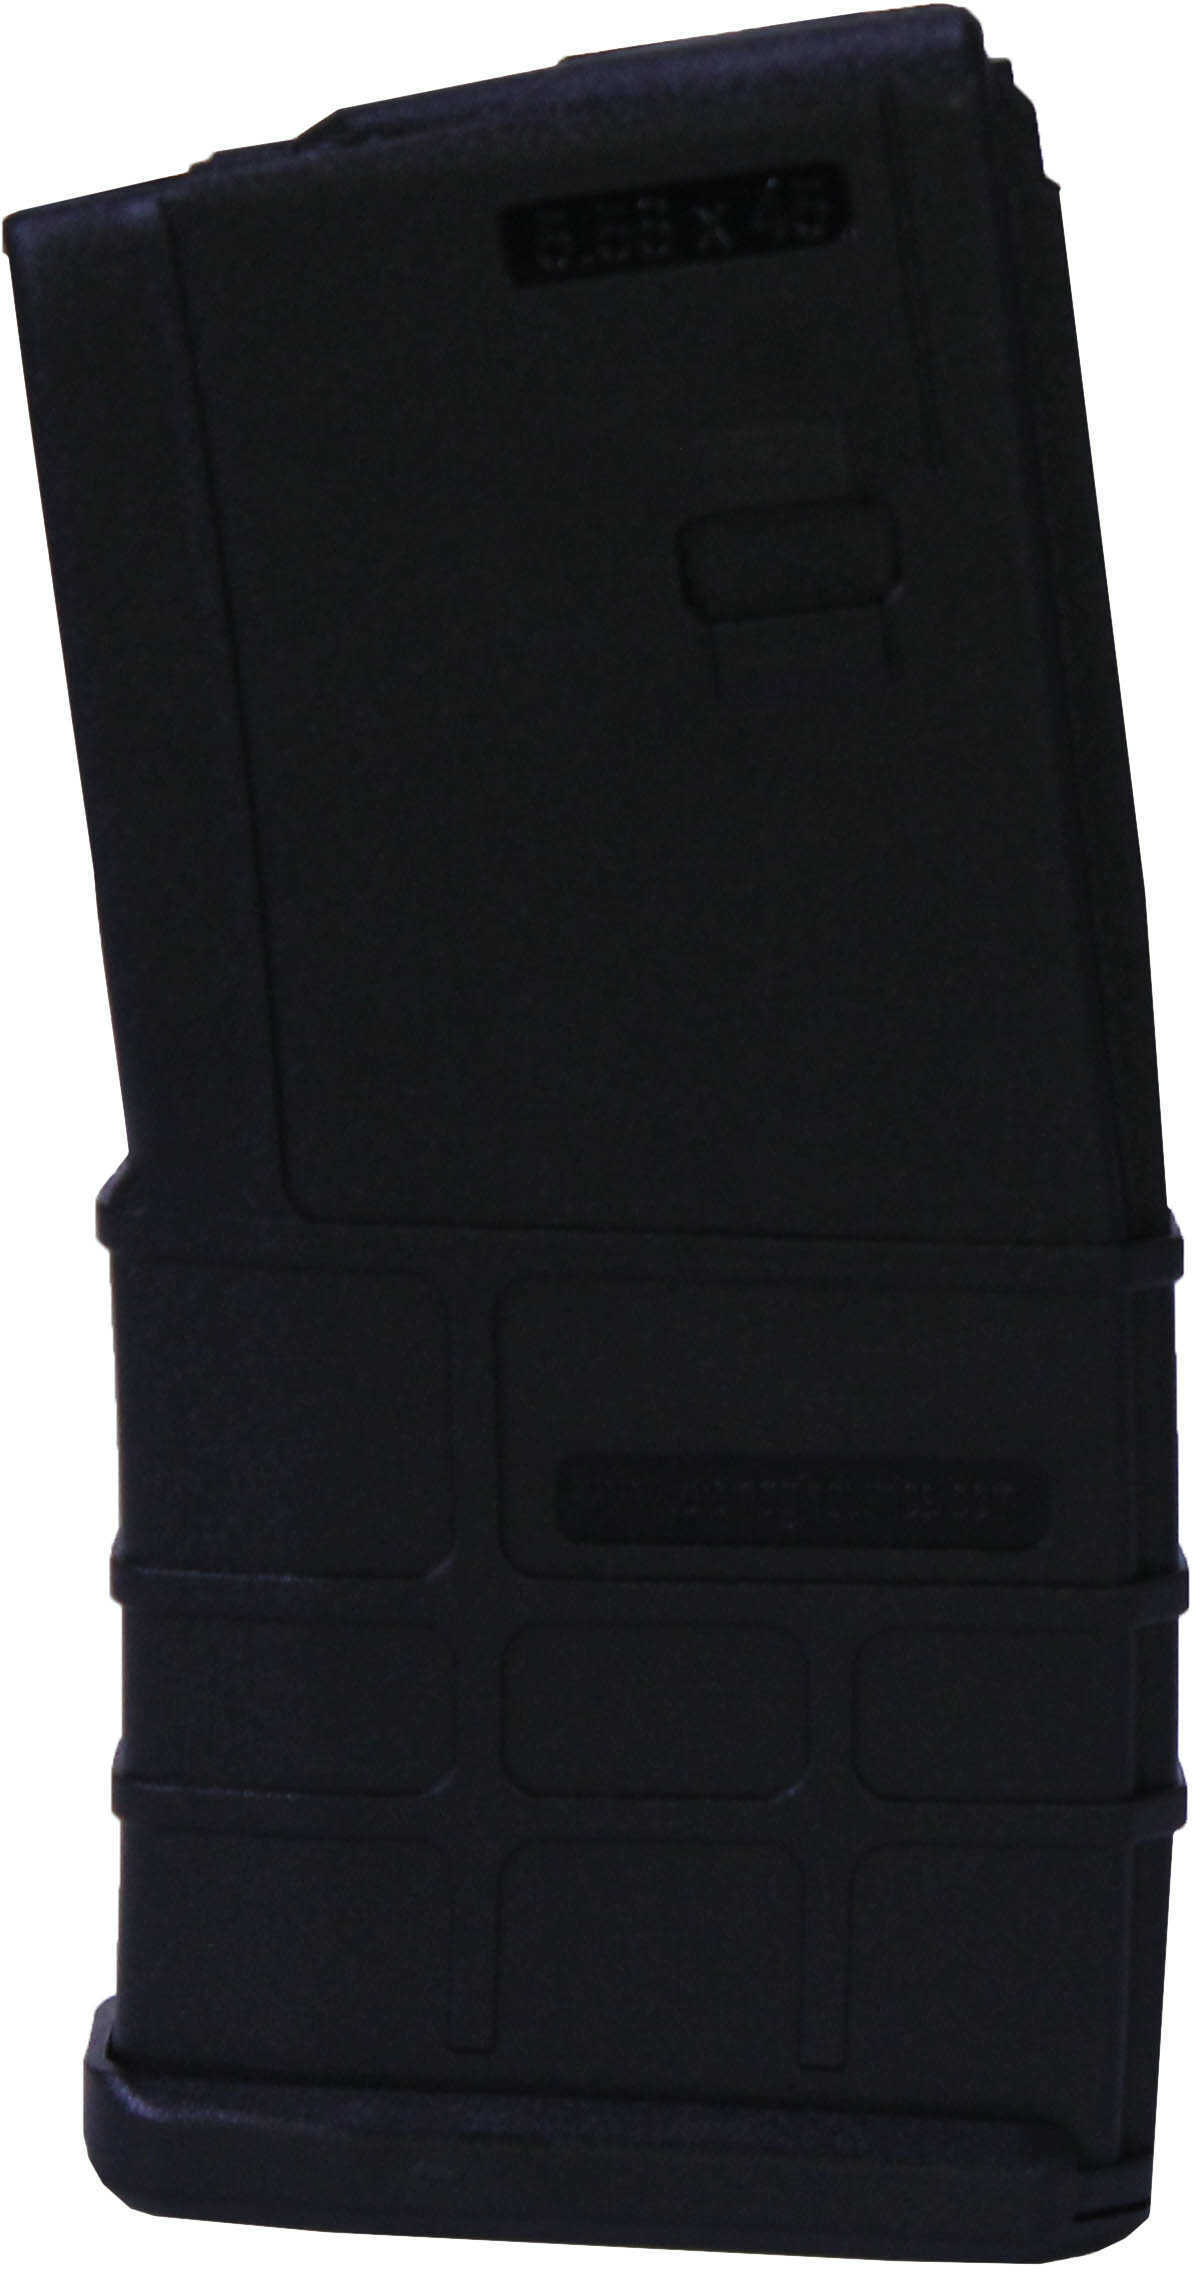 ProMag AR15/M16 .223/5.56x45mm, 20 Rounds, Black Polymer Md: COL-A9B